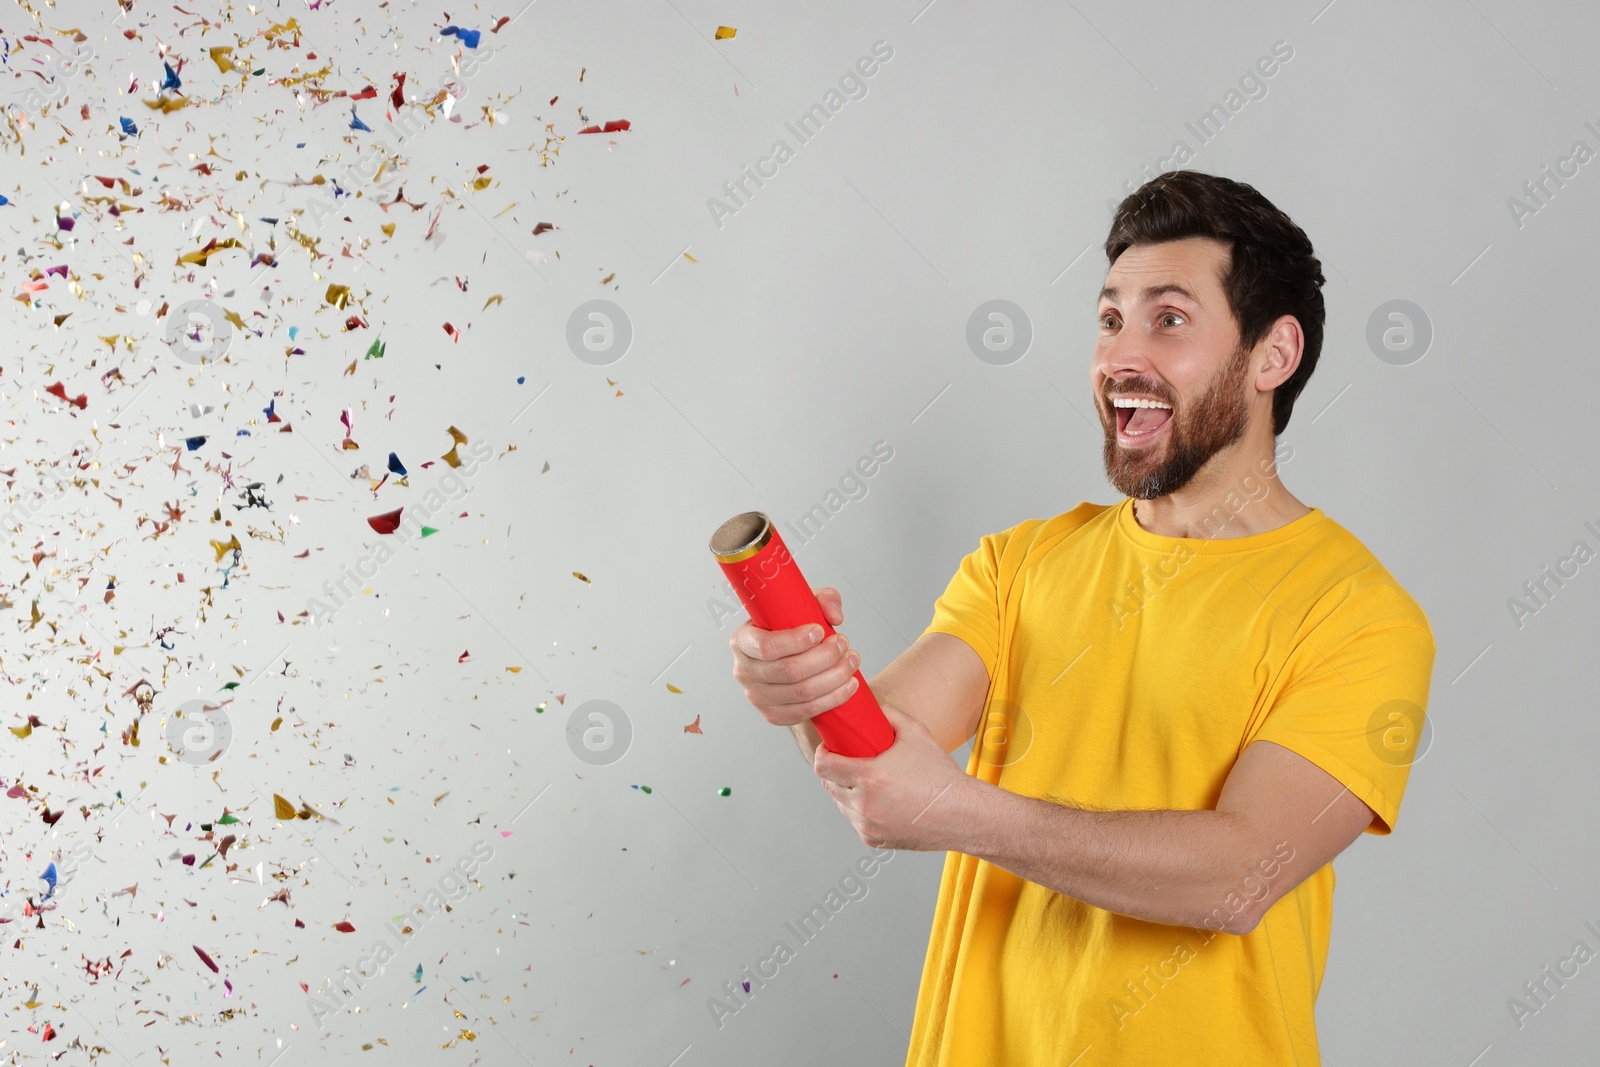 Photo of Emotional man blowing up party popper on light grey background